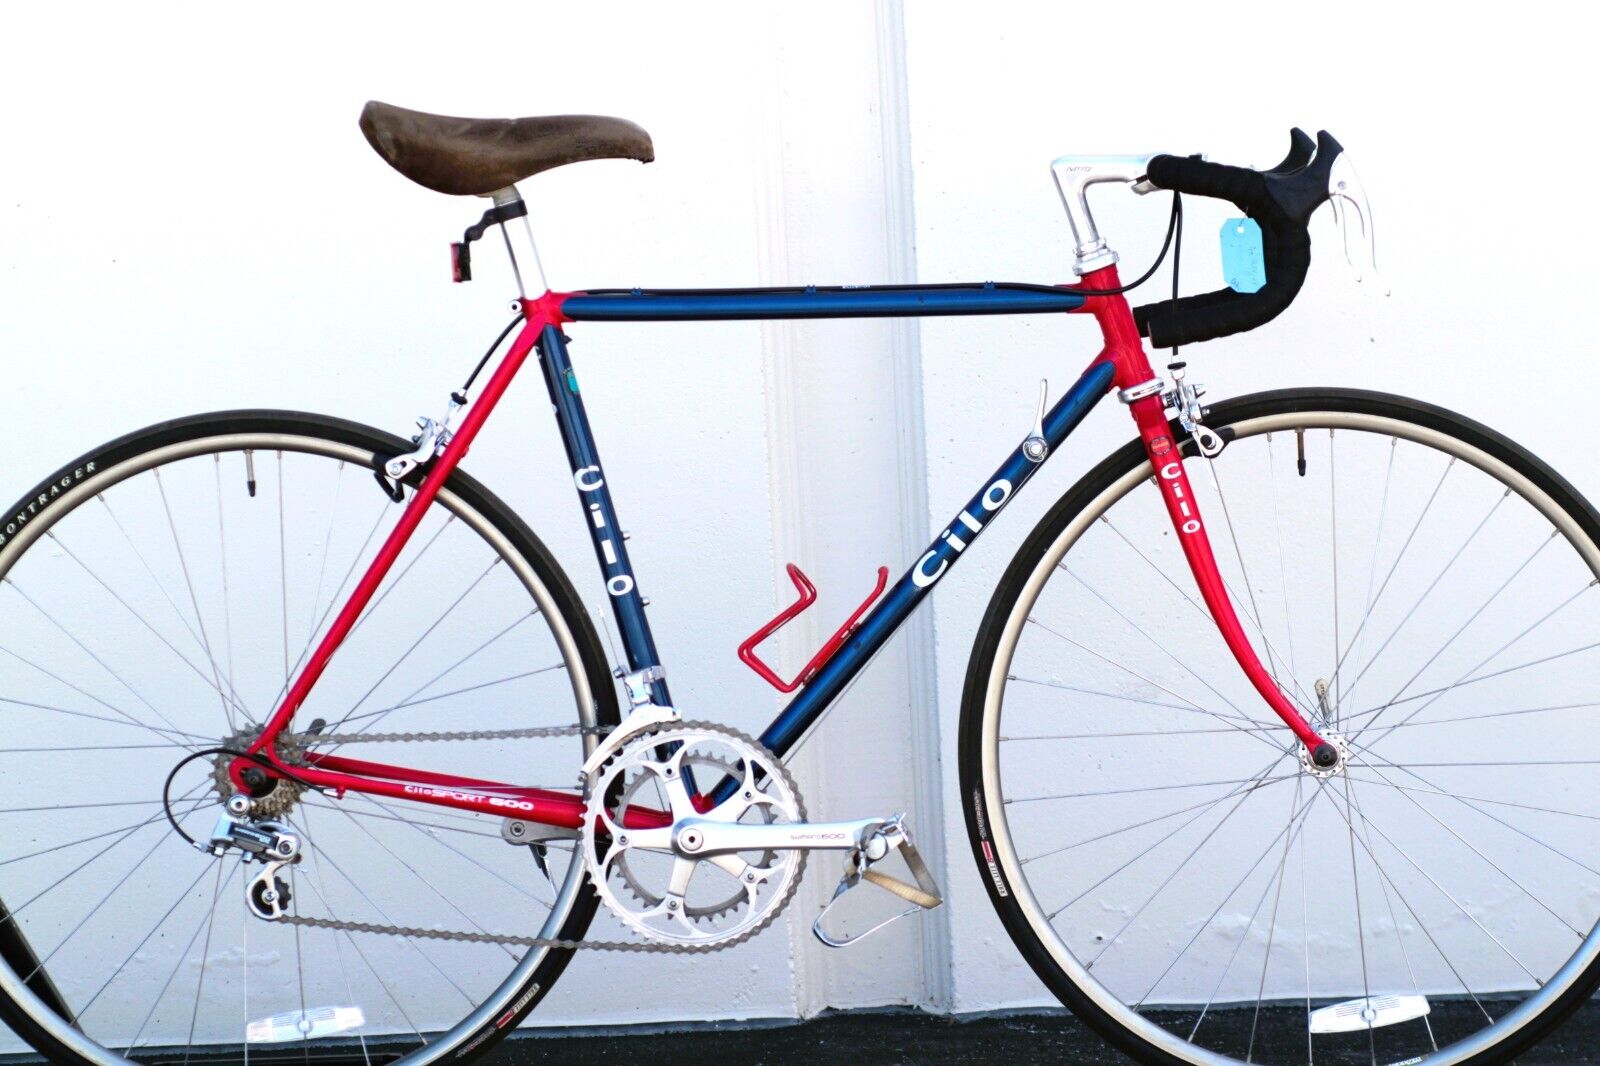 Cilo Sport 600 Classic Swiss Lugged Tange Steel Road Bike blue/red - Small - VGC